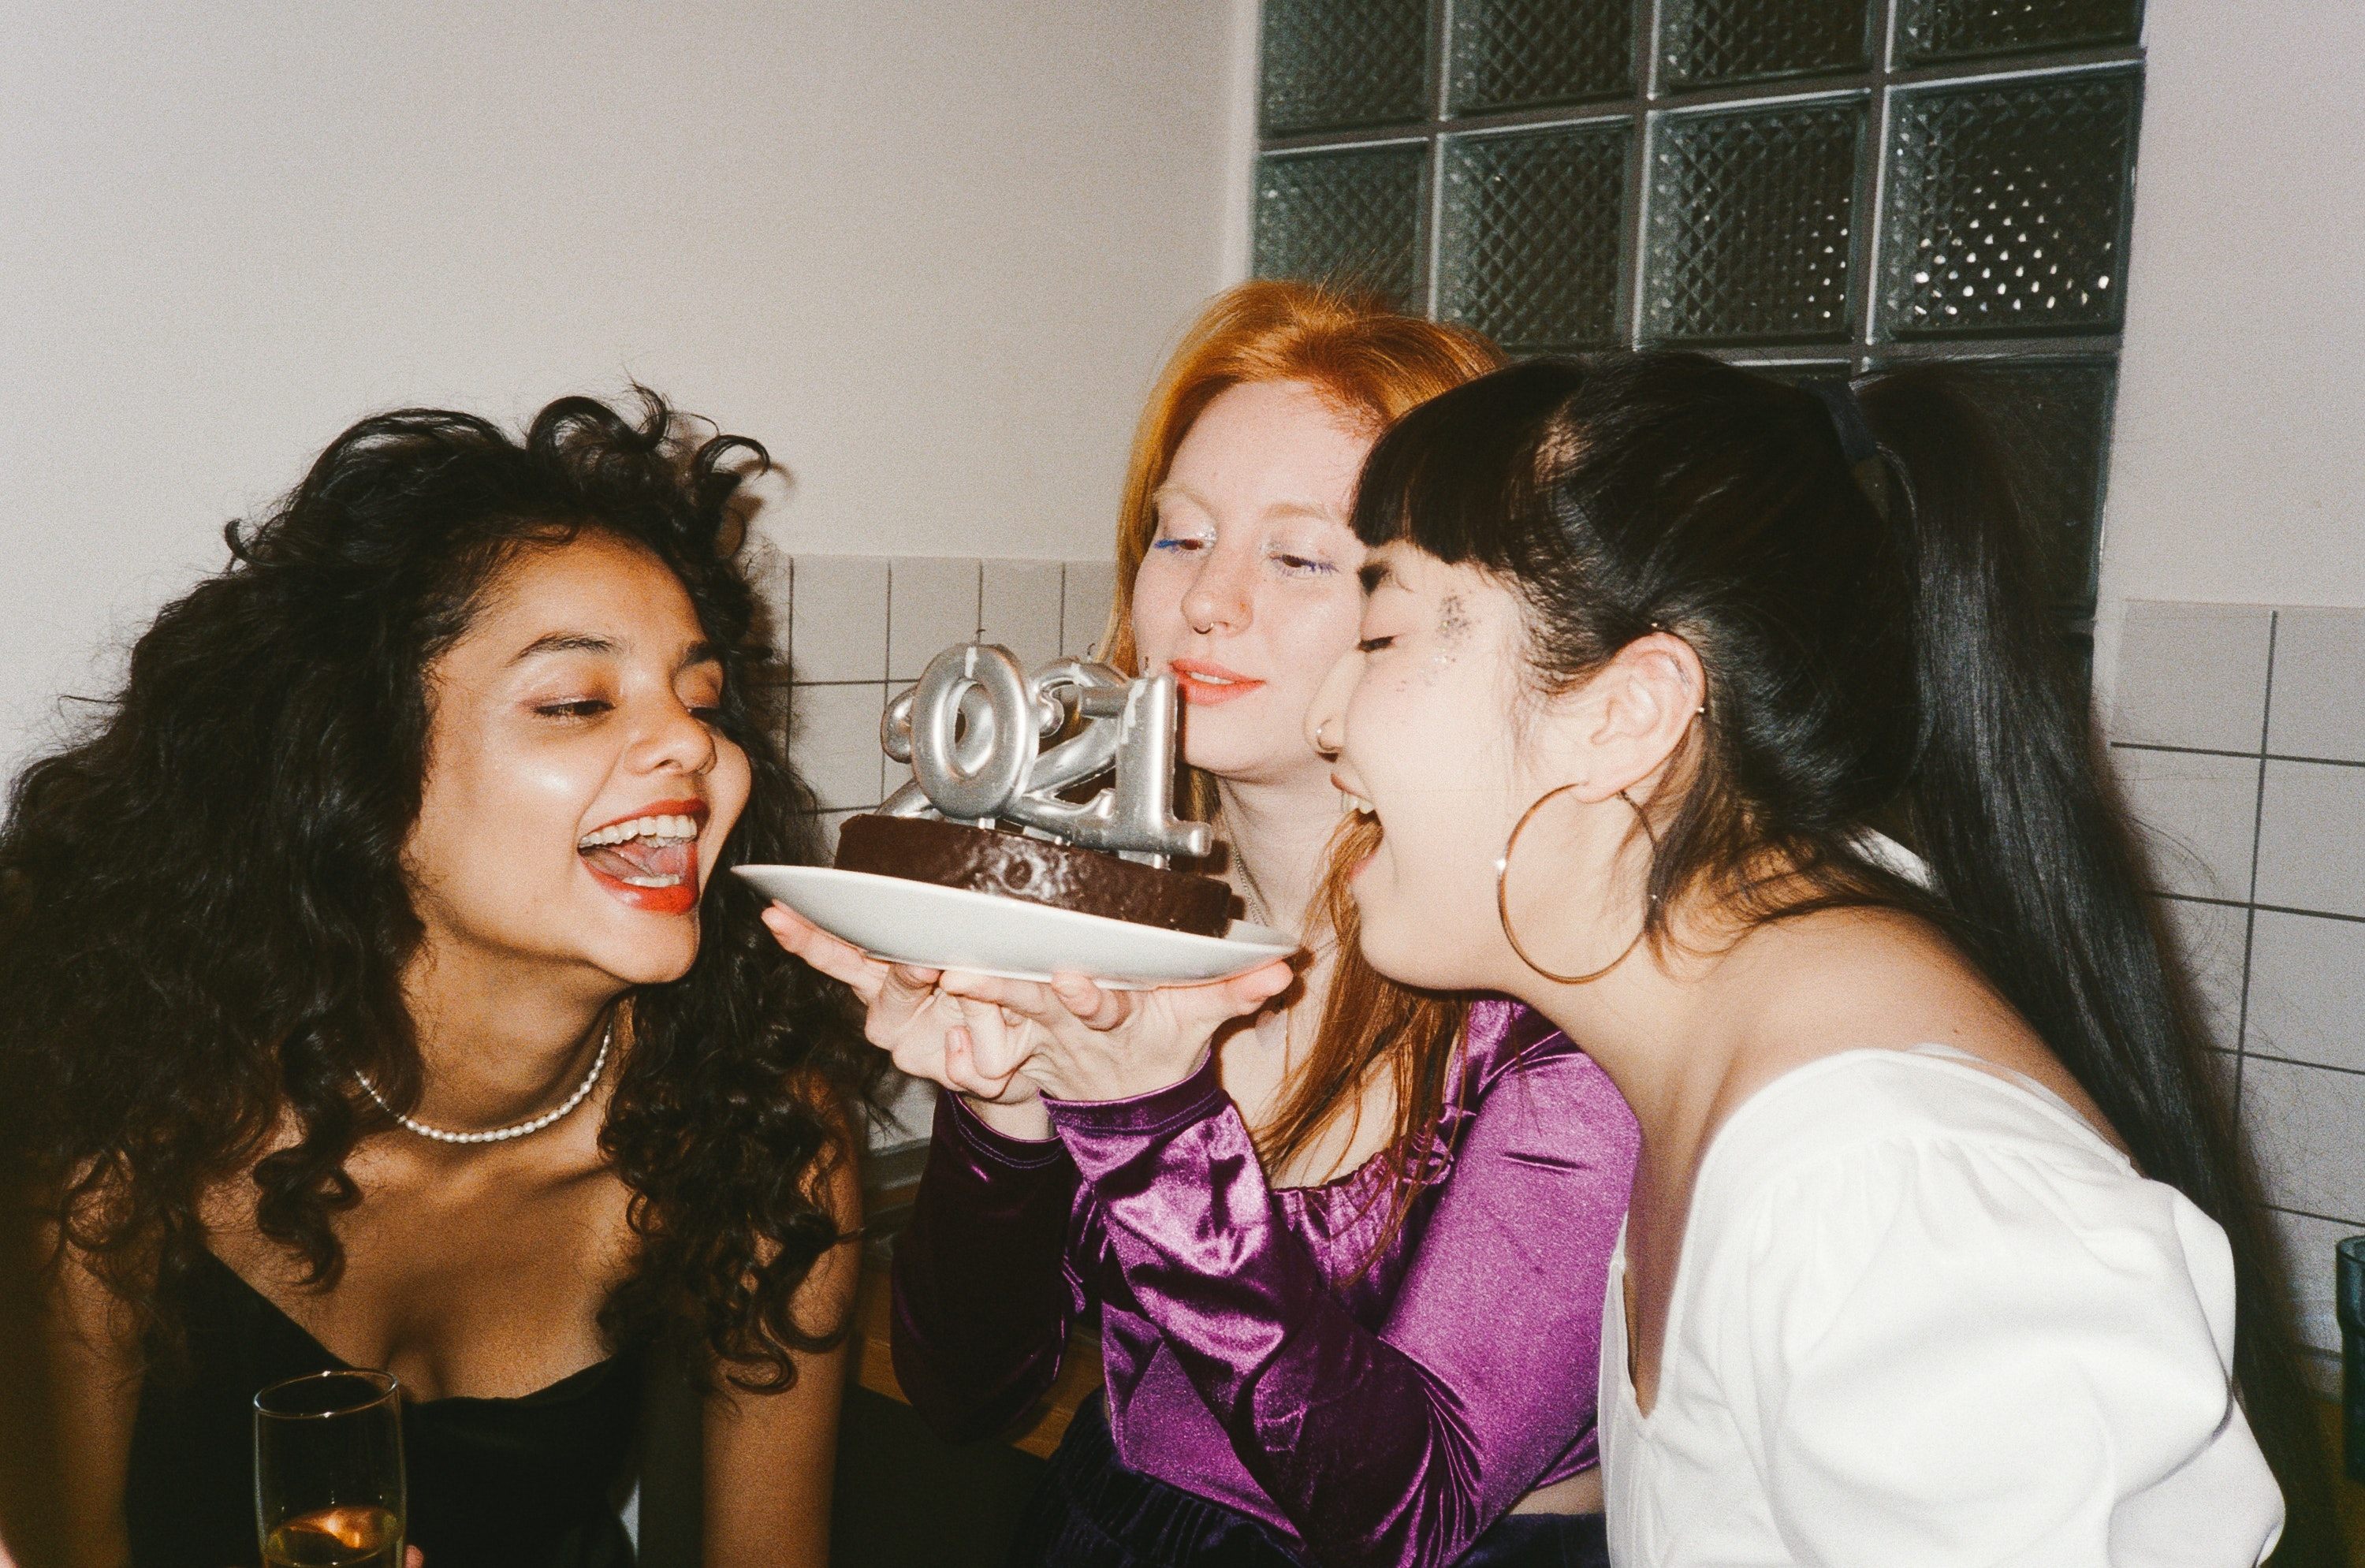 Three girls, indoors, having a good time, holding a cake with candles in it.